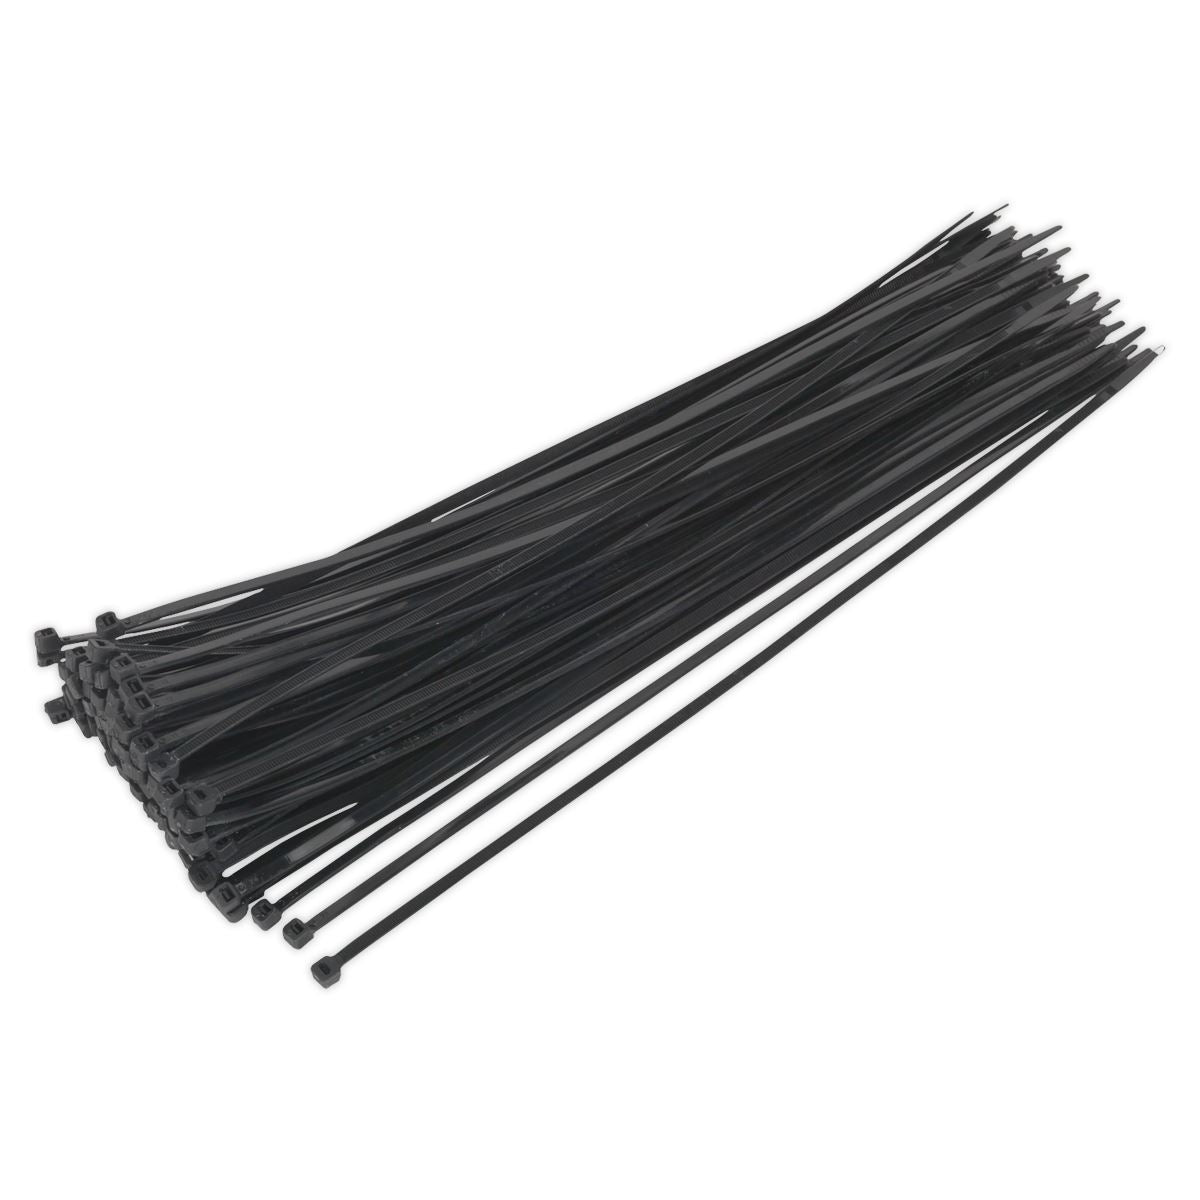 Sealey Cable Tie 380 x 4.8mm Black Pack of 100